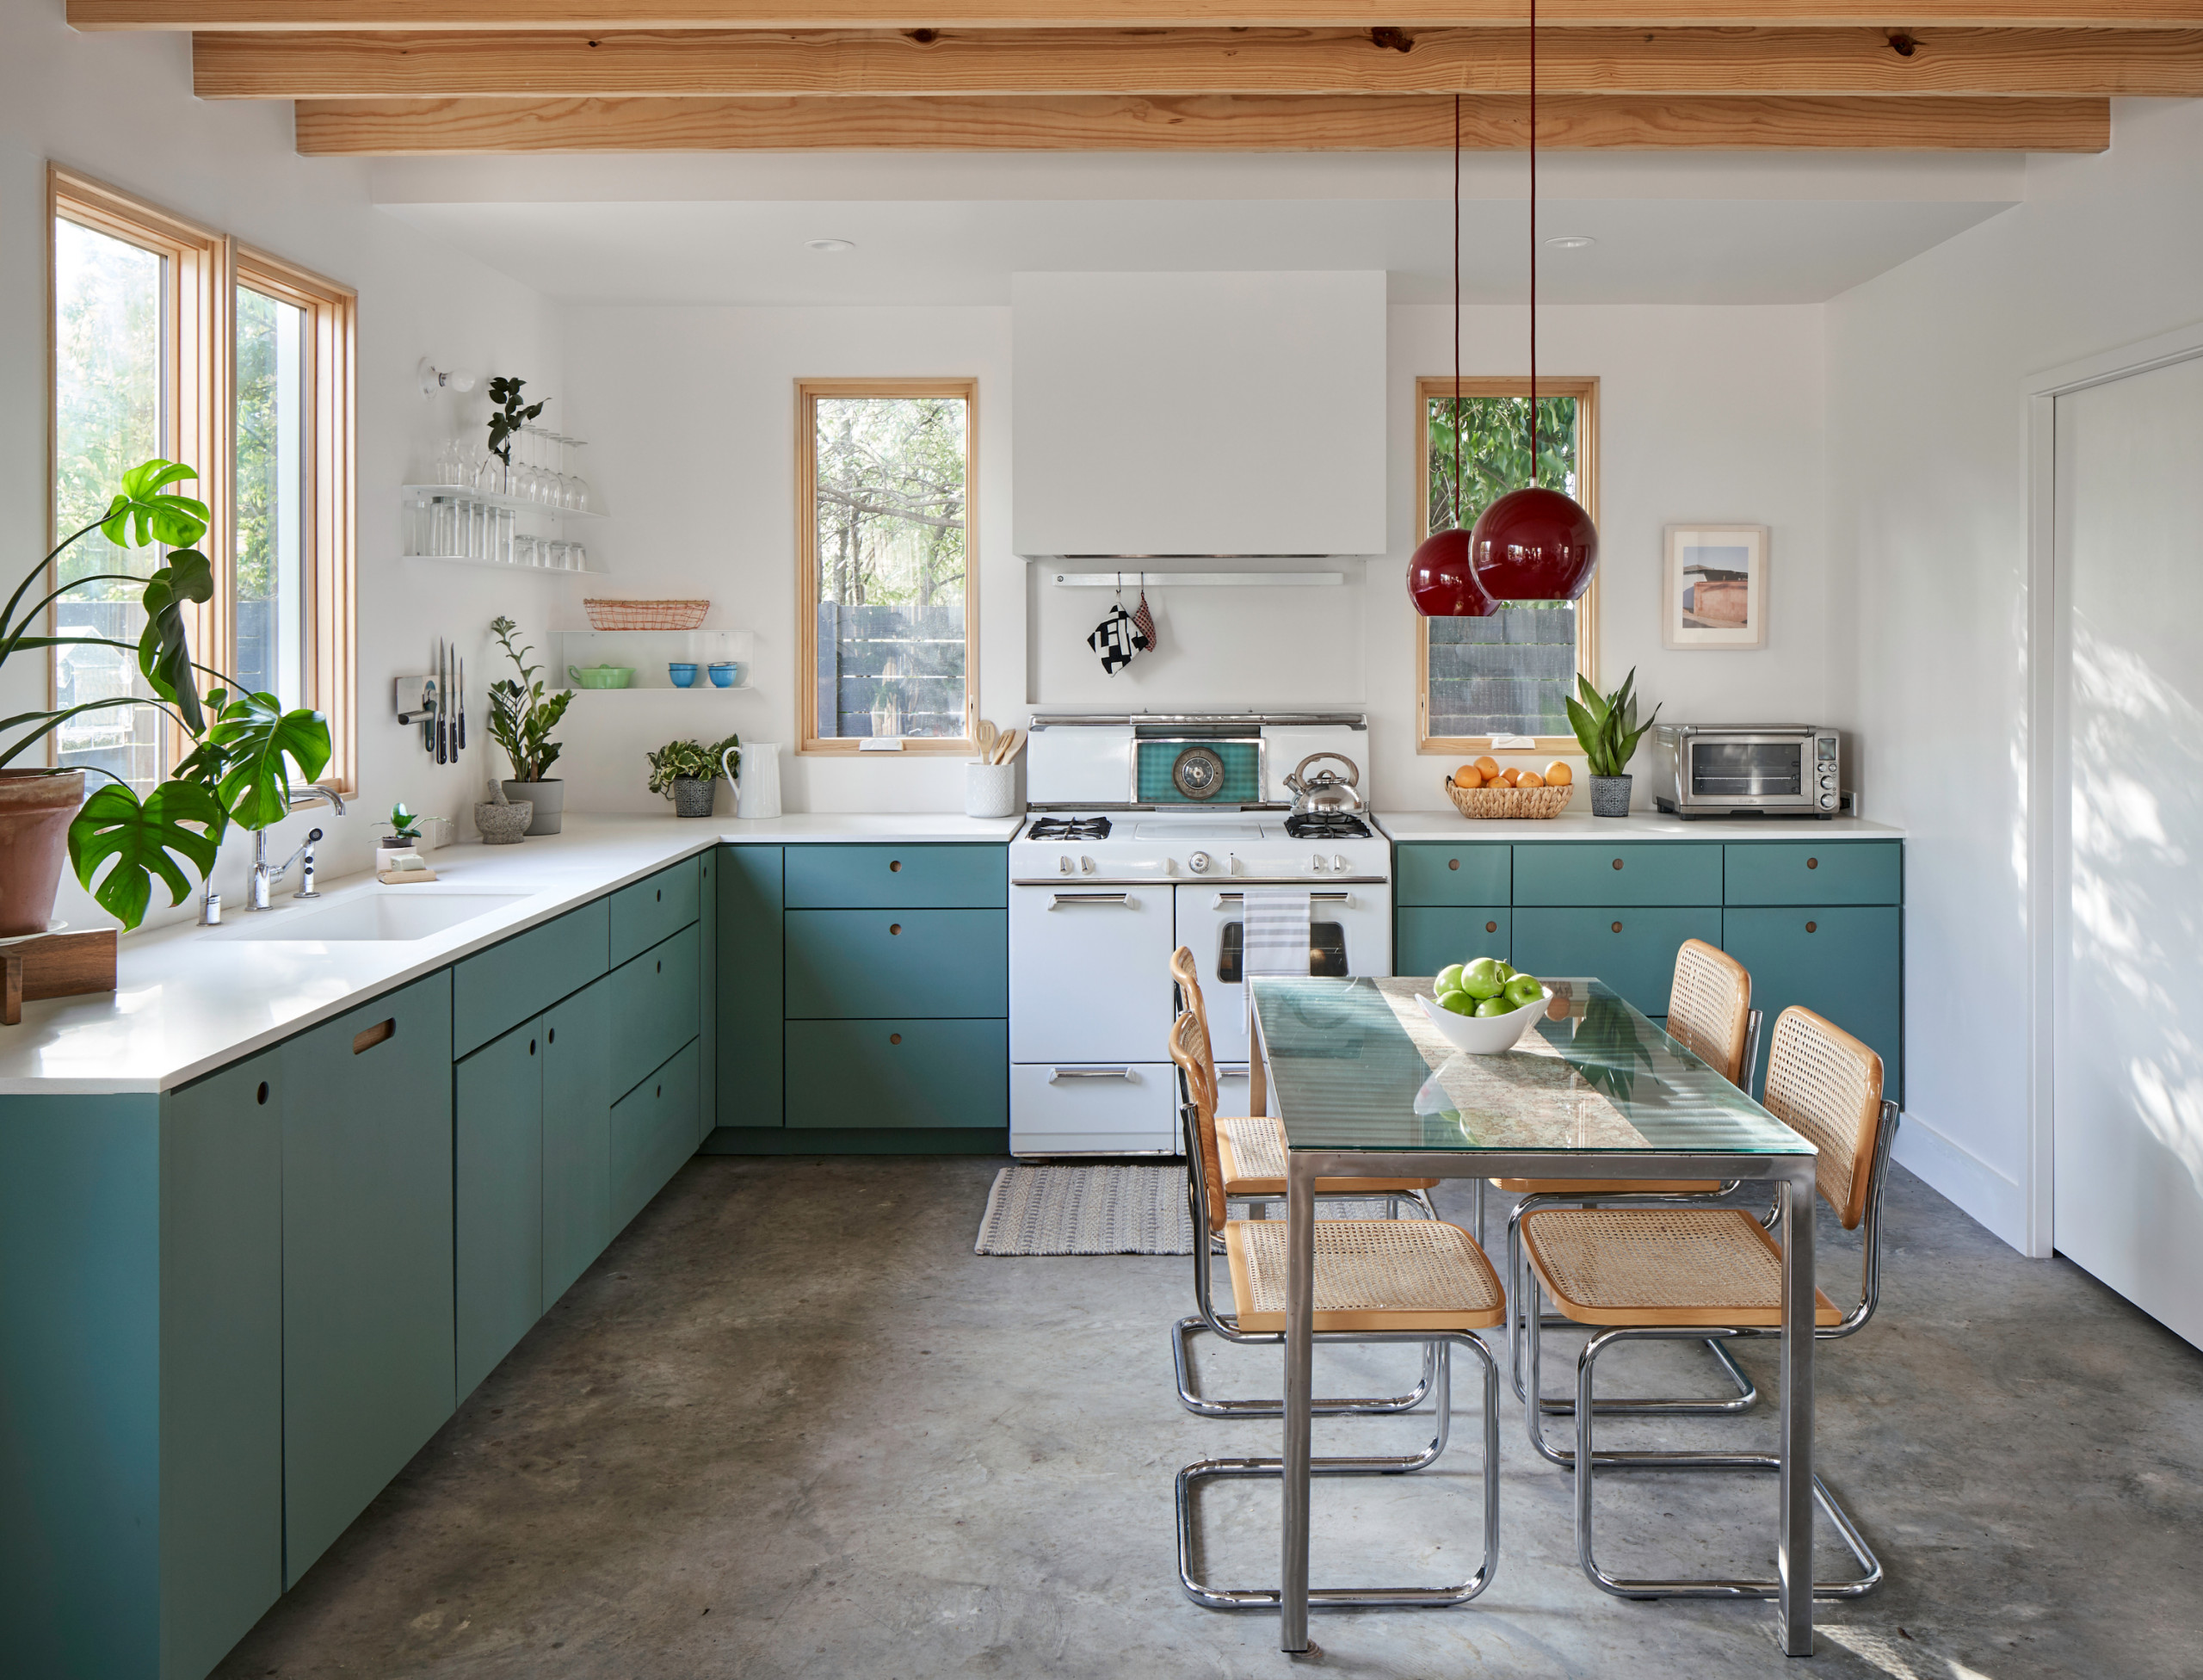 Green Cabinets And White Appliances